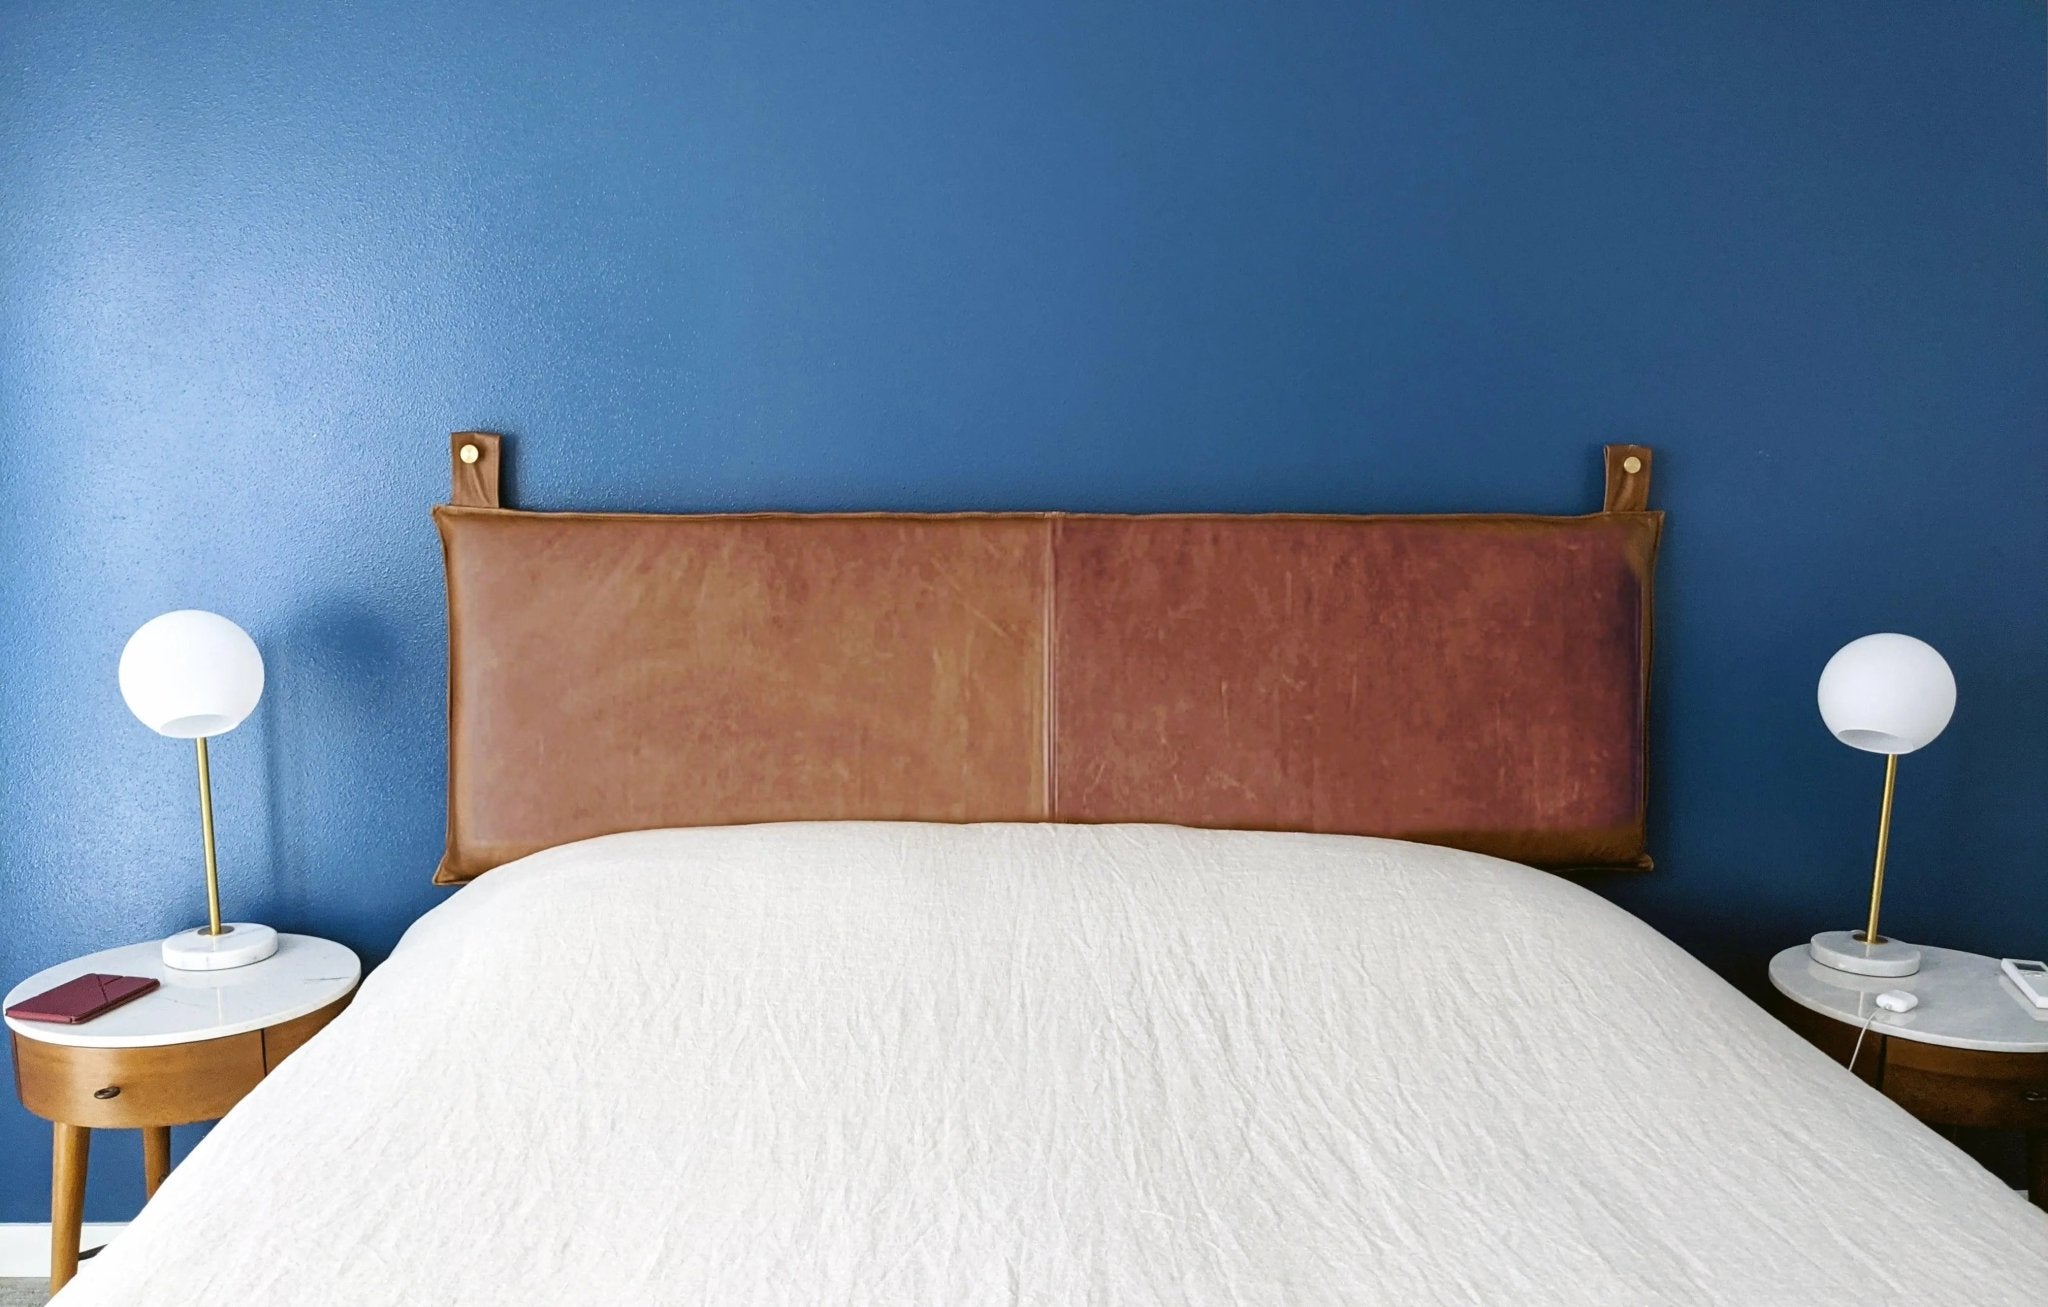 Leather Headboard KING - Whiskey Brown - Hanging with Straps